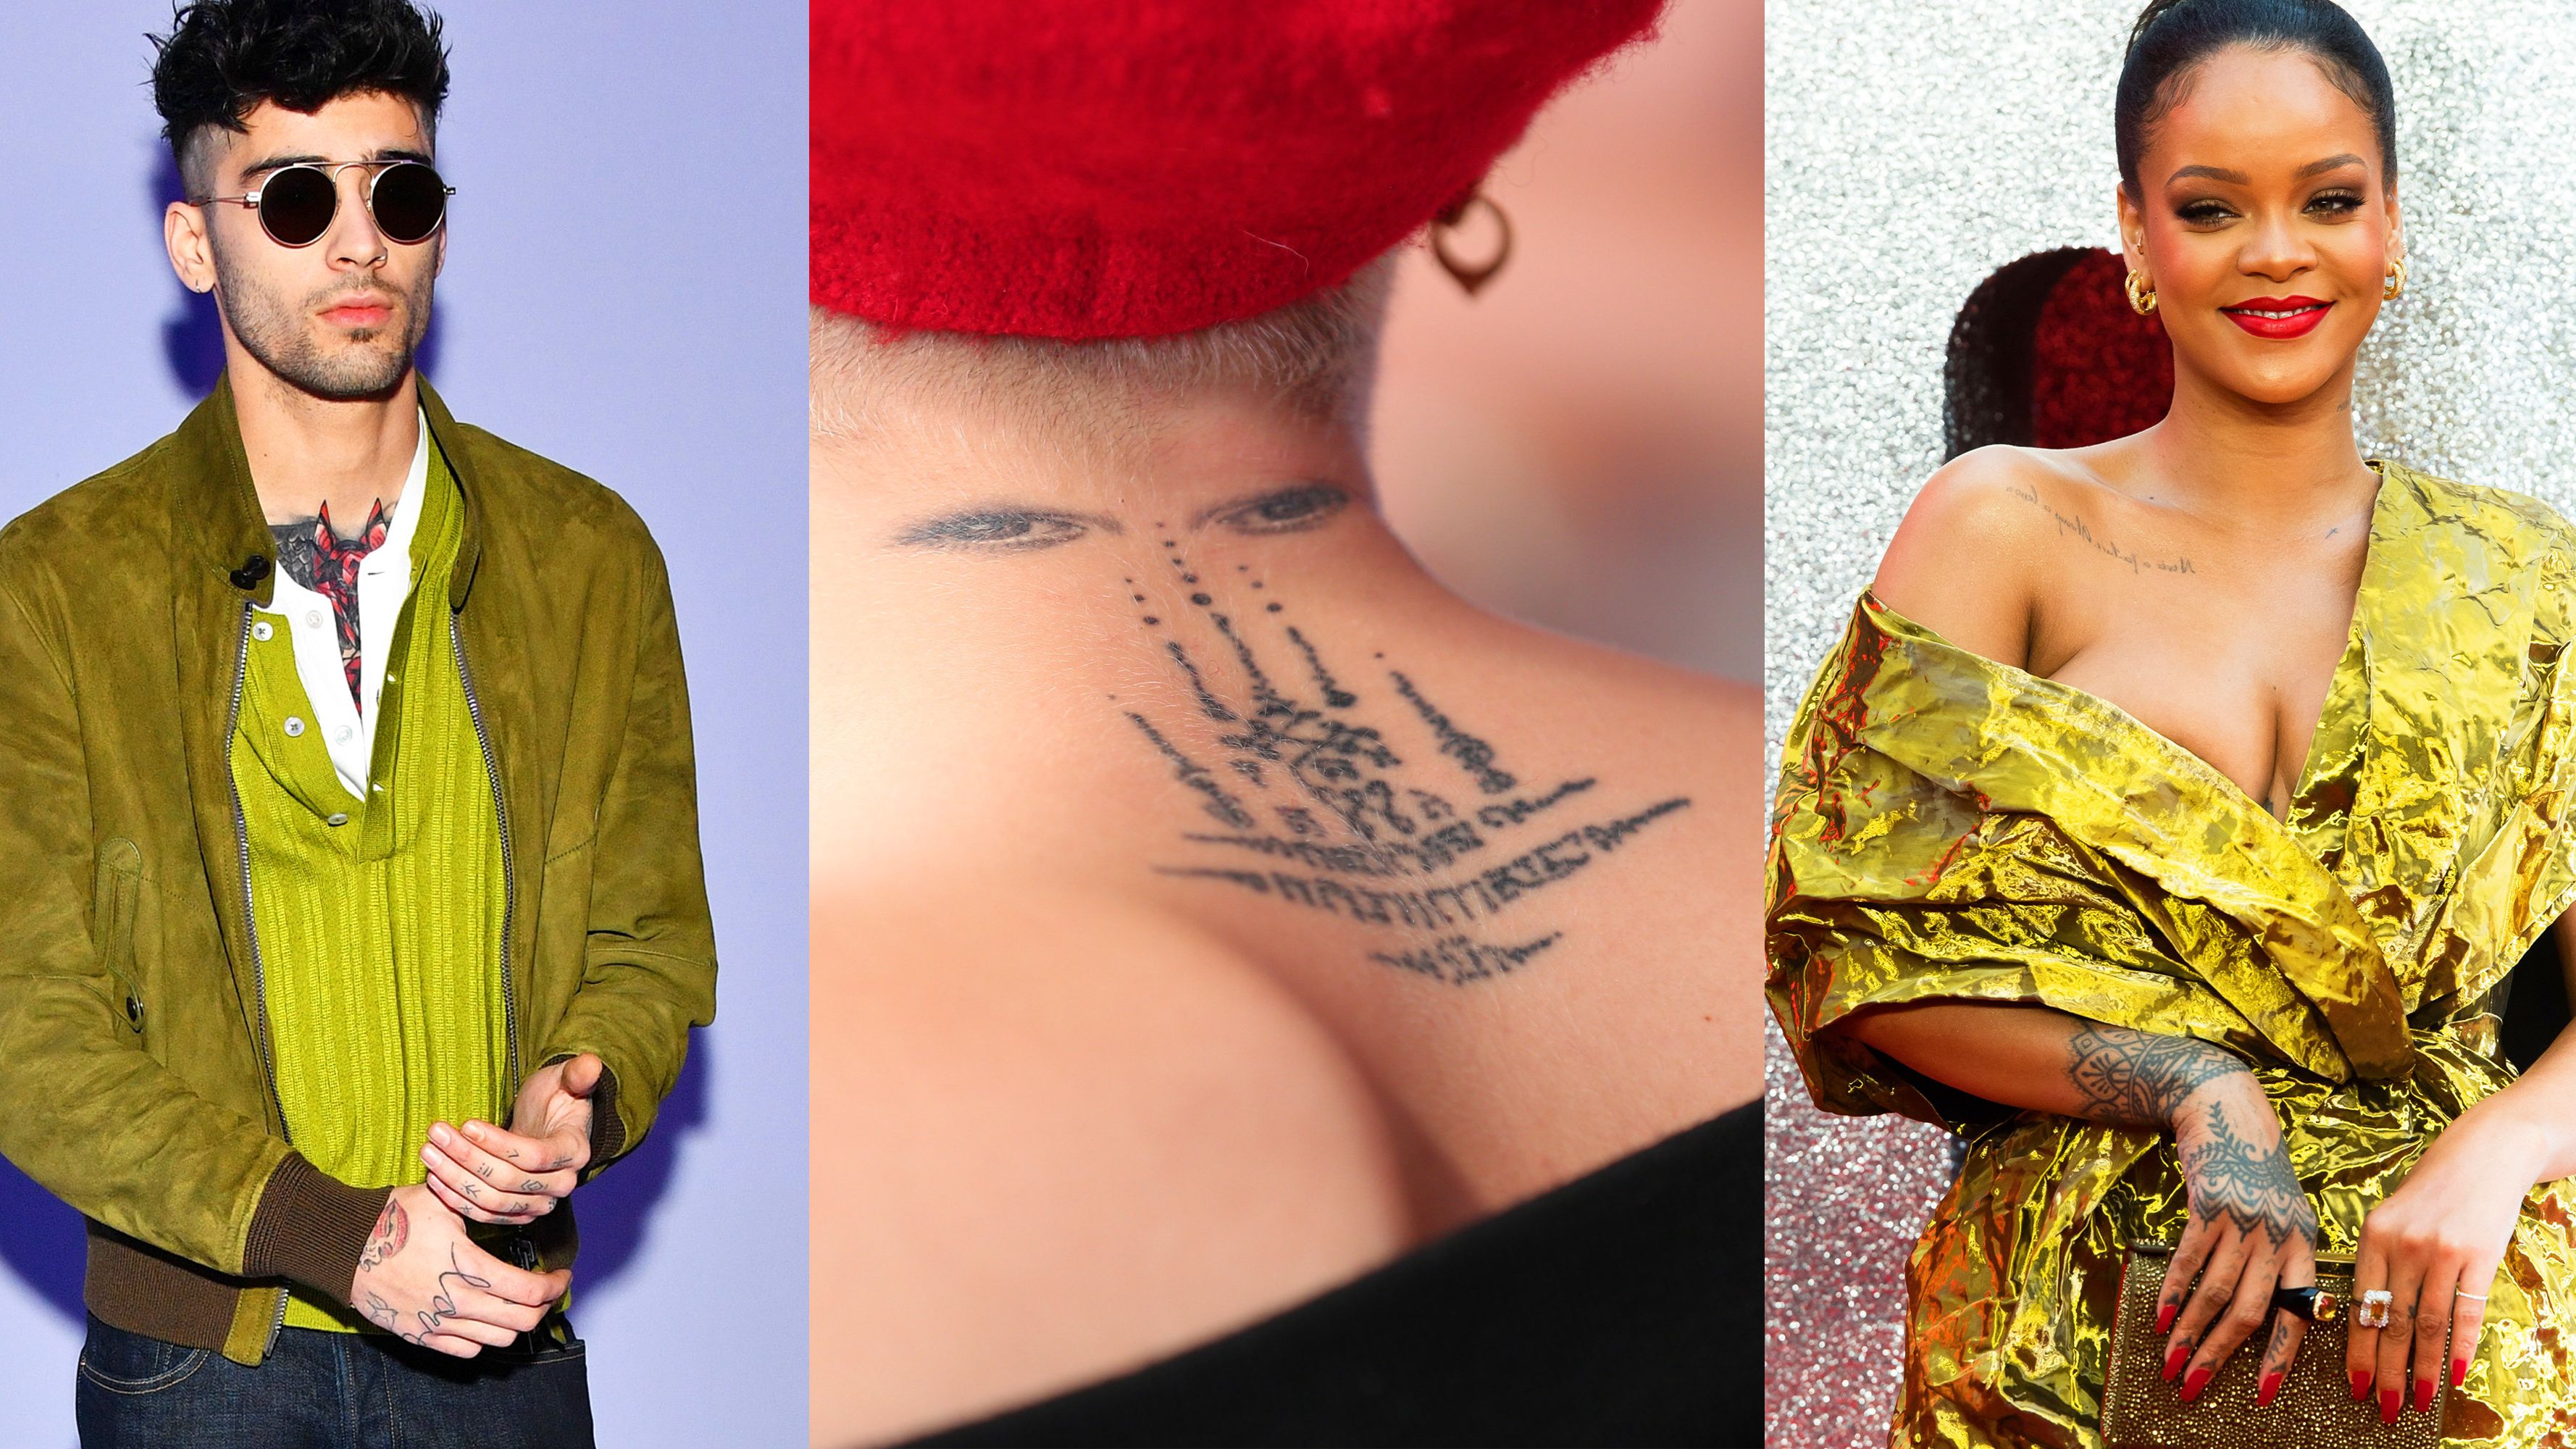 Celebs who have tattoos